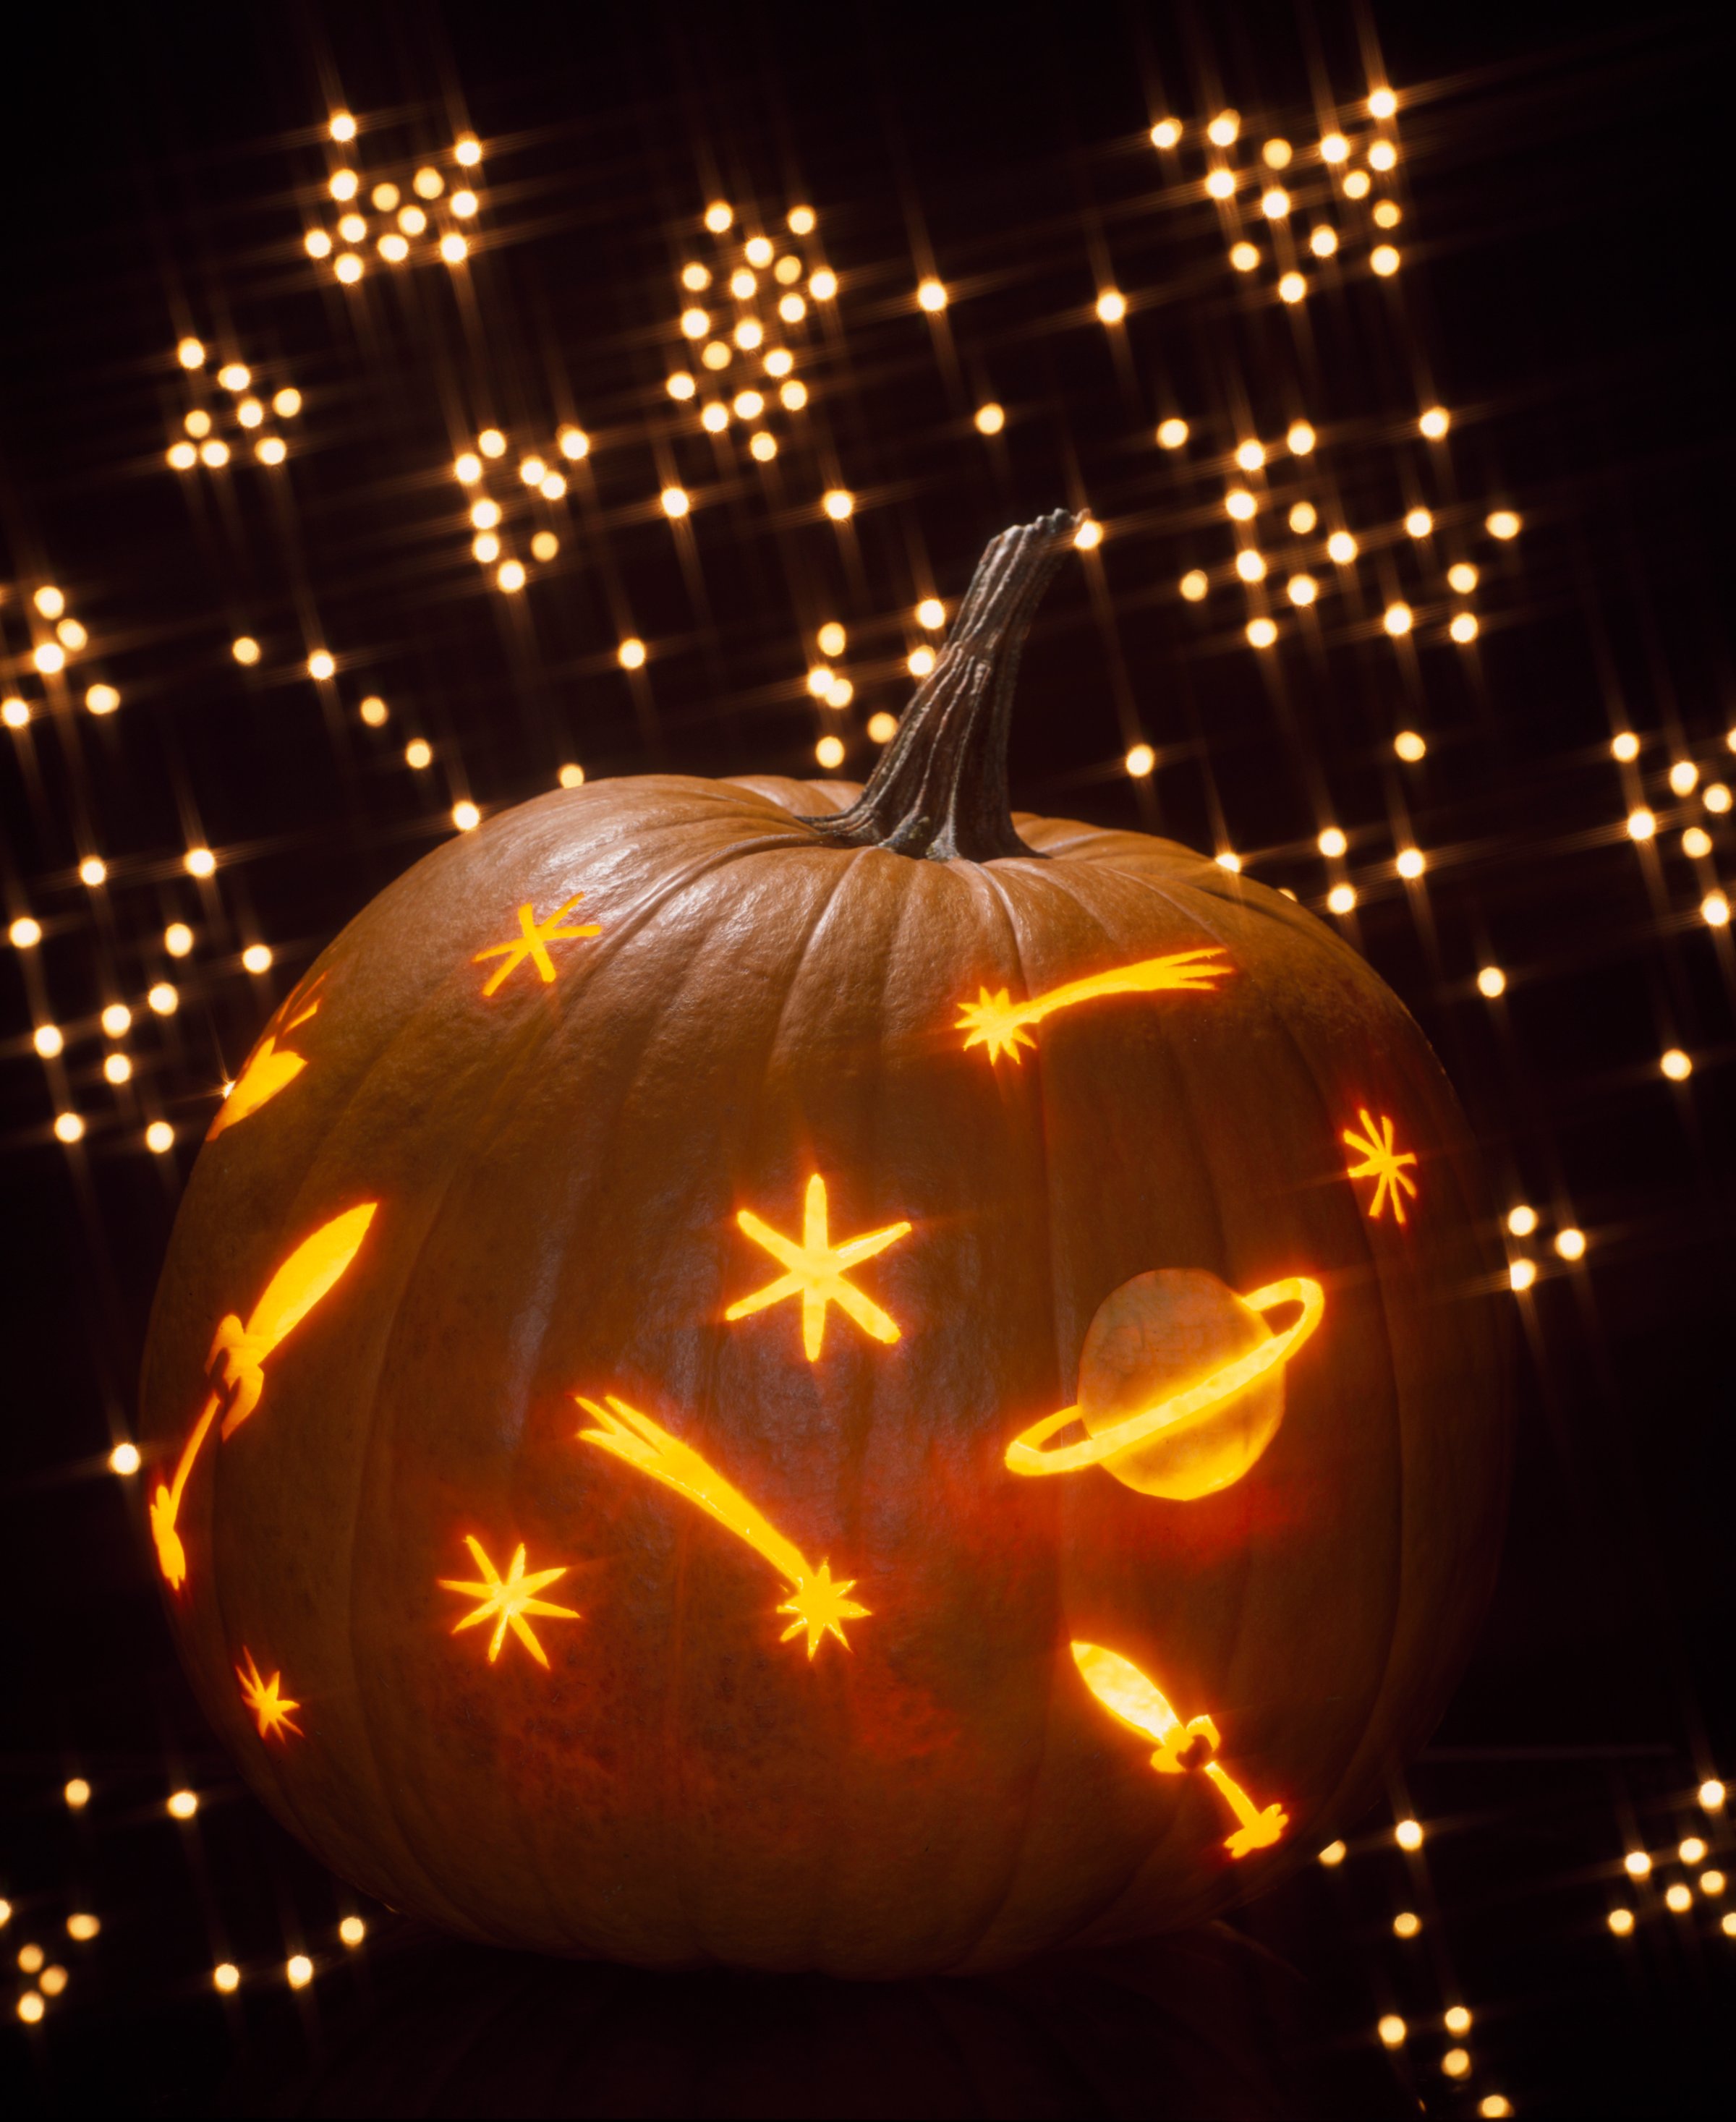 Pumpkin carved as a galaxy of shooting stars and planets